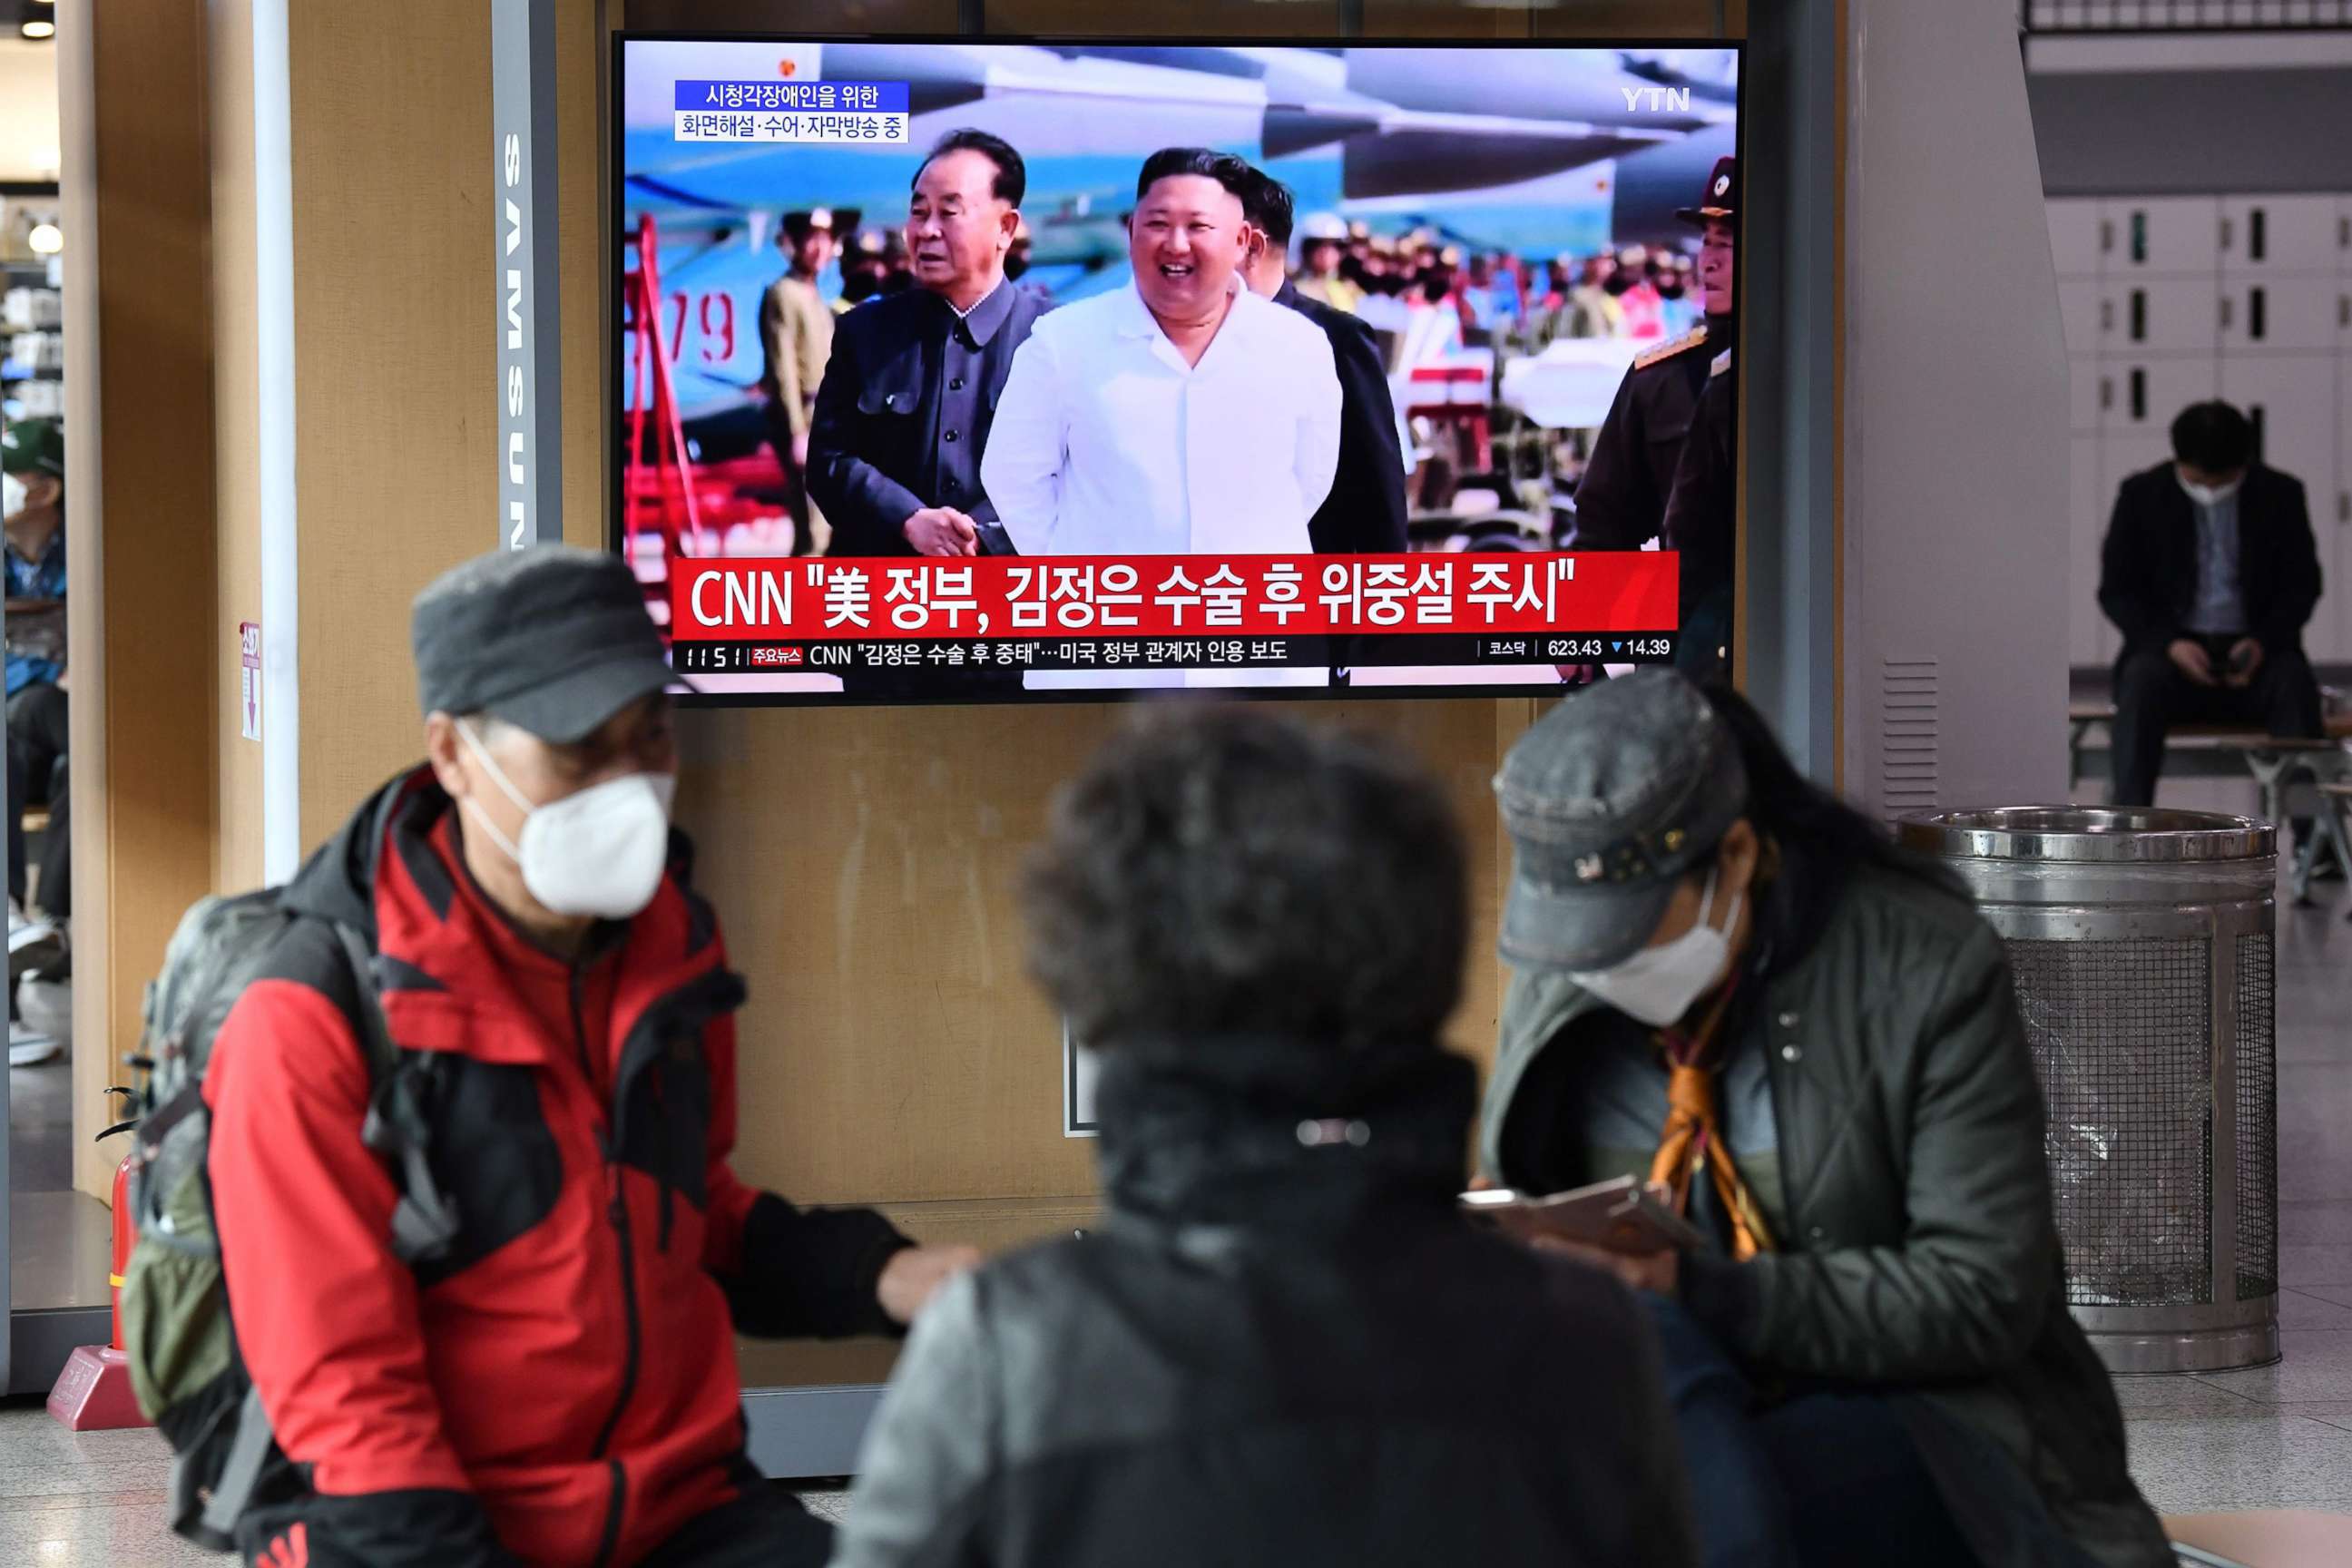 PHOTO: People watch a television news broadcast showing file footage of North Korean leader Kim Jong Un, at a railway station, in Seoul on April 21, 2020.